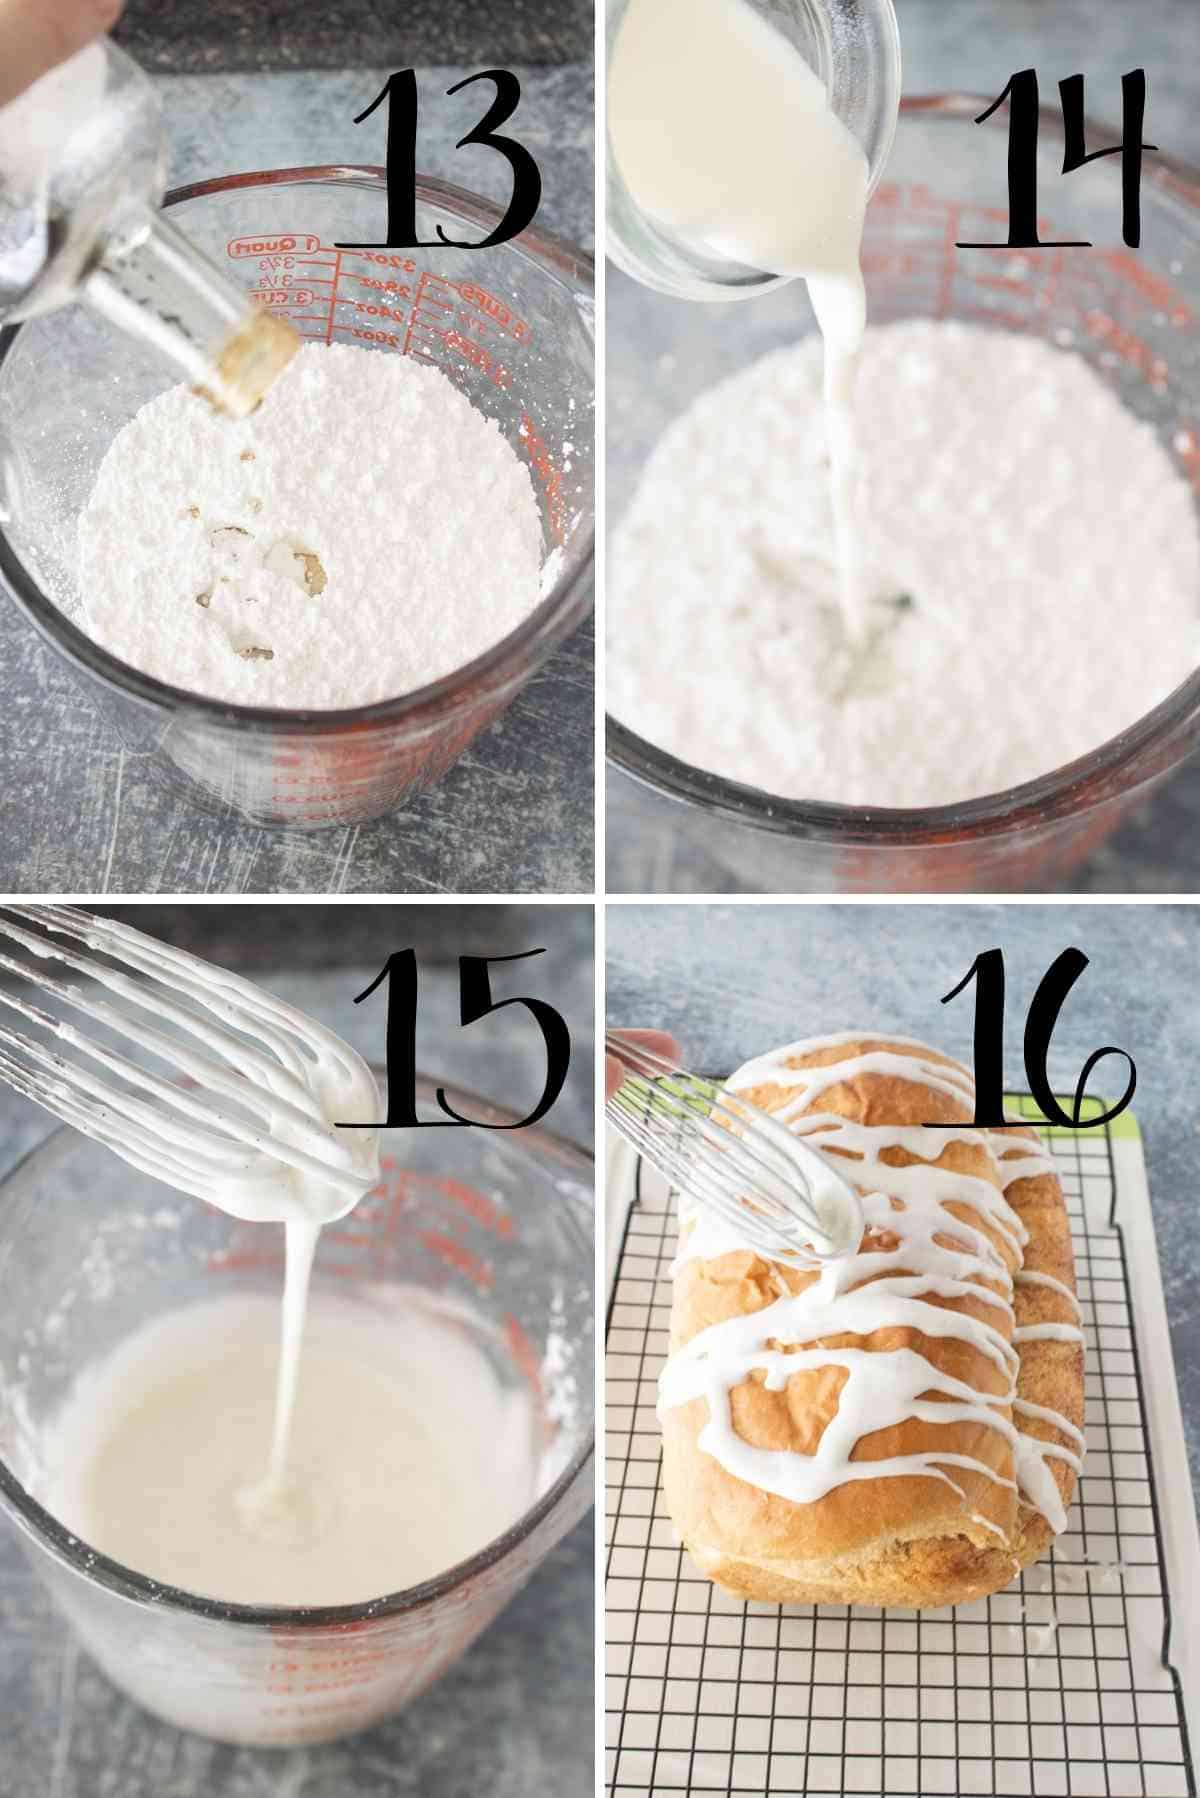 Whisk icing ingredients until smooth.  Drizzle over baked and cooled cinnamon bread.